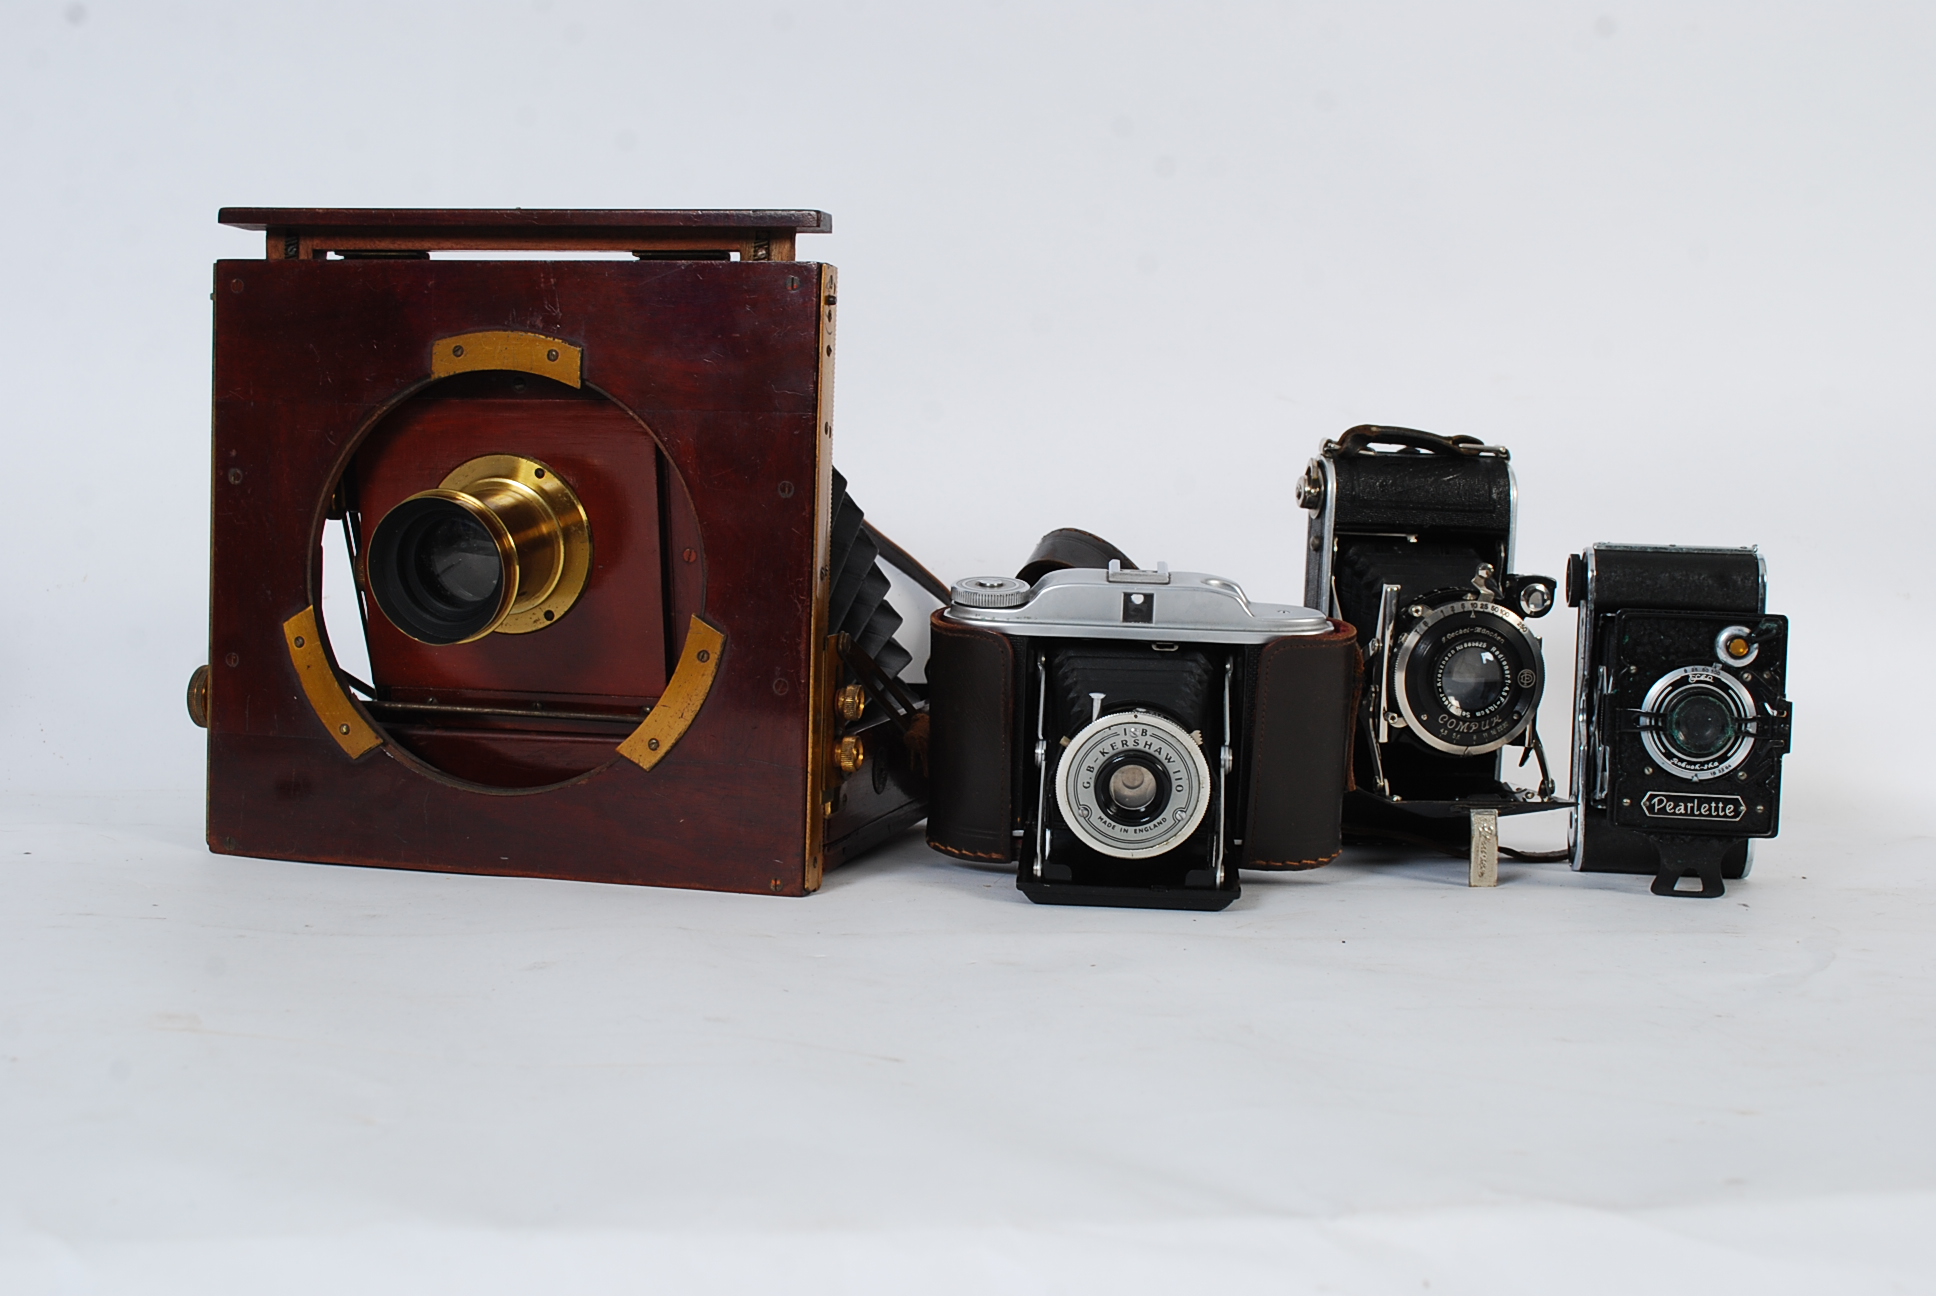 A W B & Sons Ltd box concertina camera with small plaque attached " The National Camera " along with